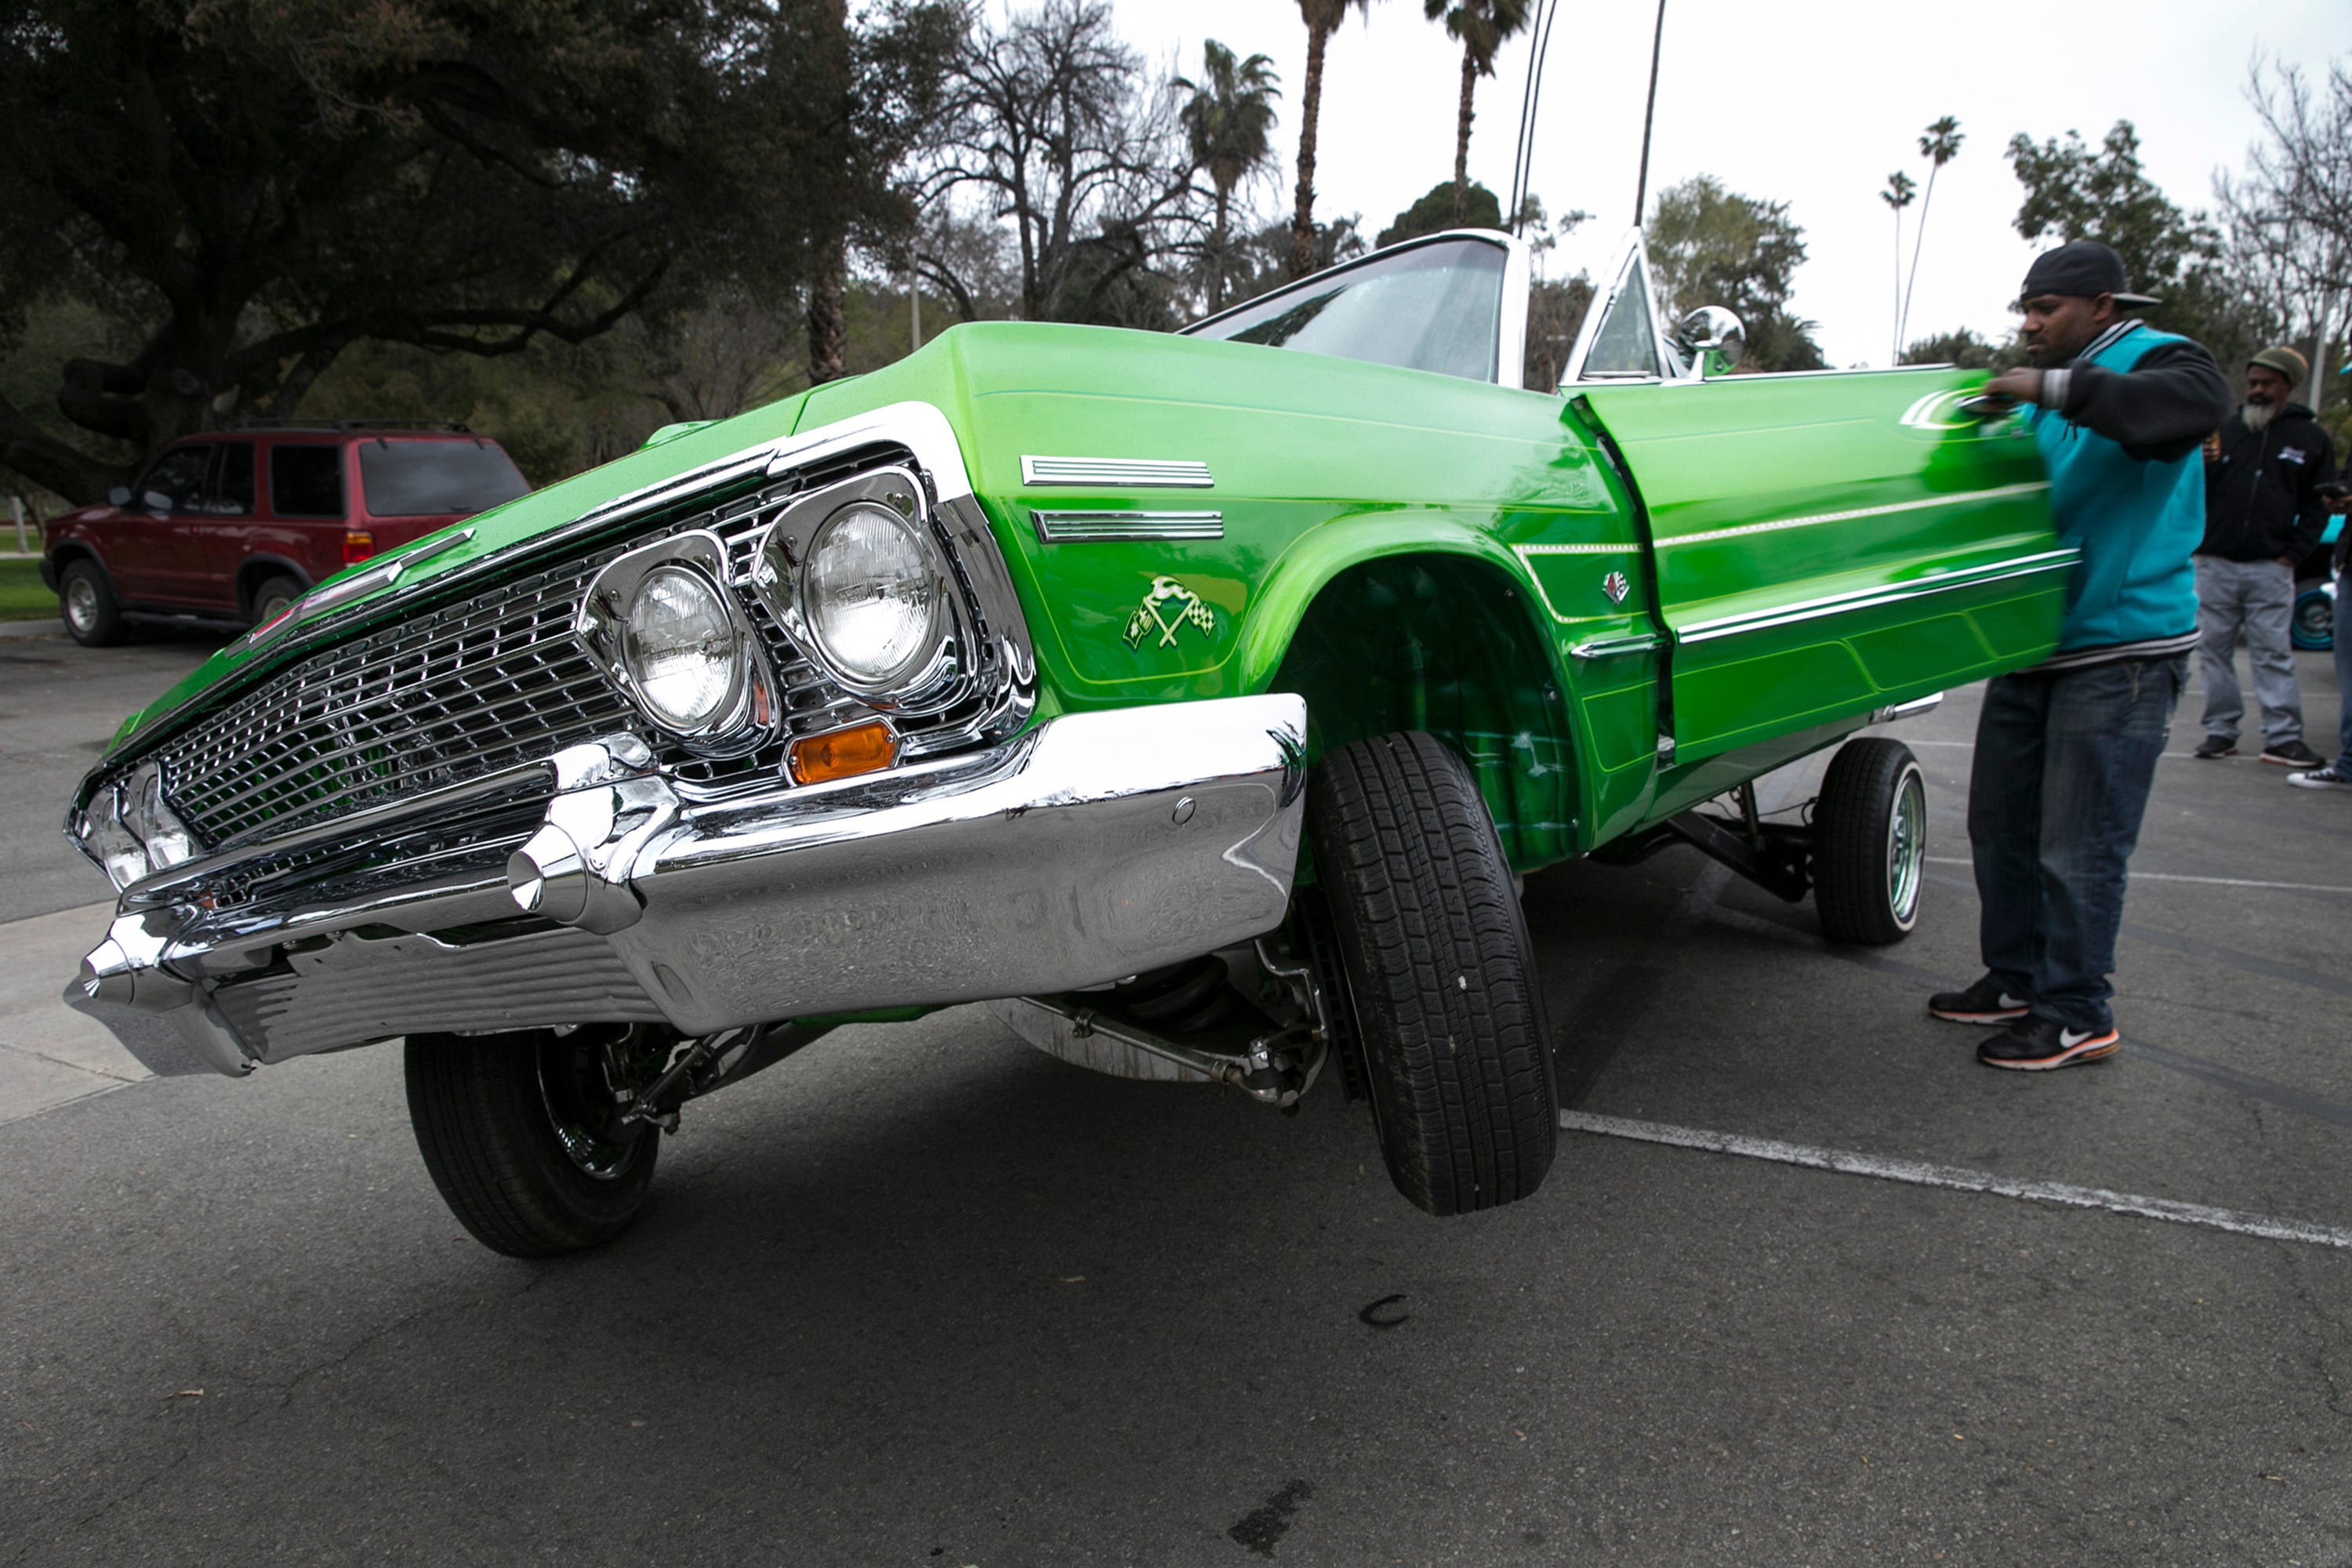 A modified 1963 Chevy Impala during the Ultimate Riders Car Club at Fairmount Park  in Riverside, Calif, March 5, 2017